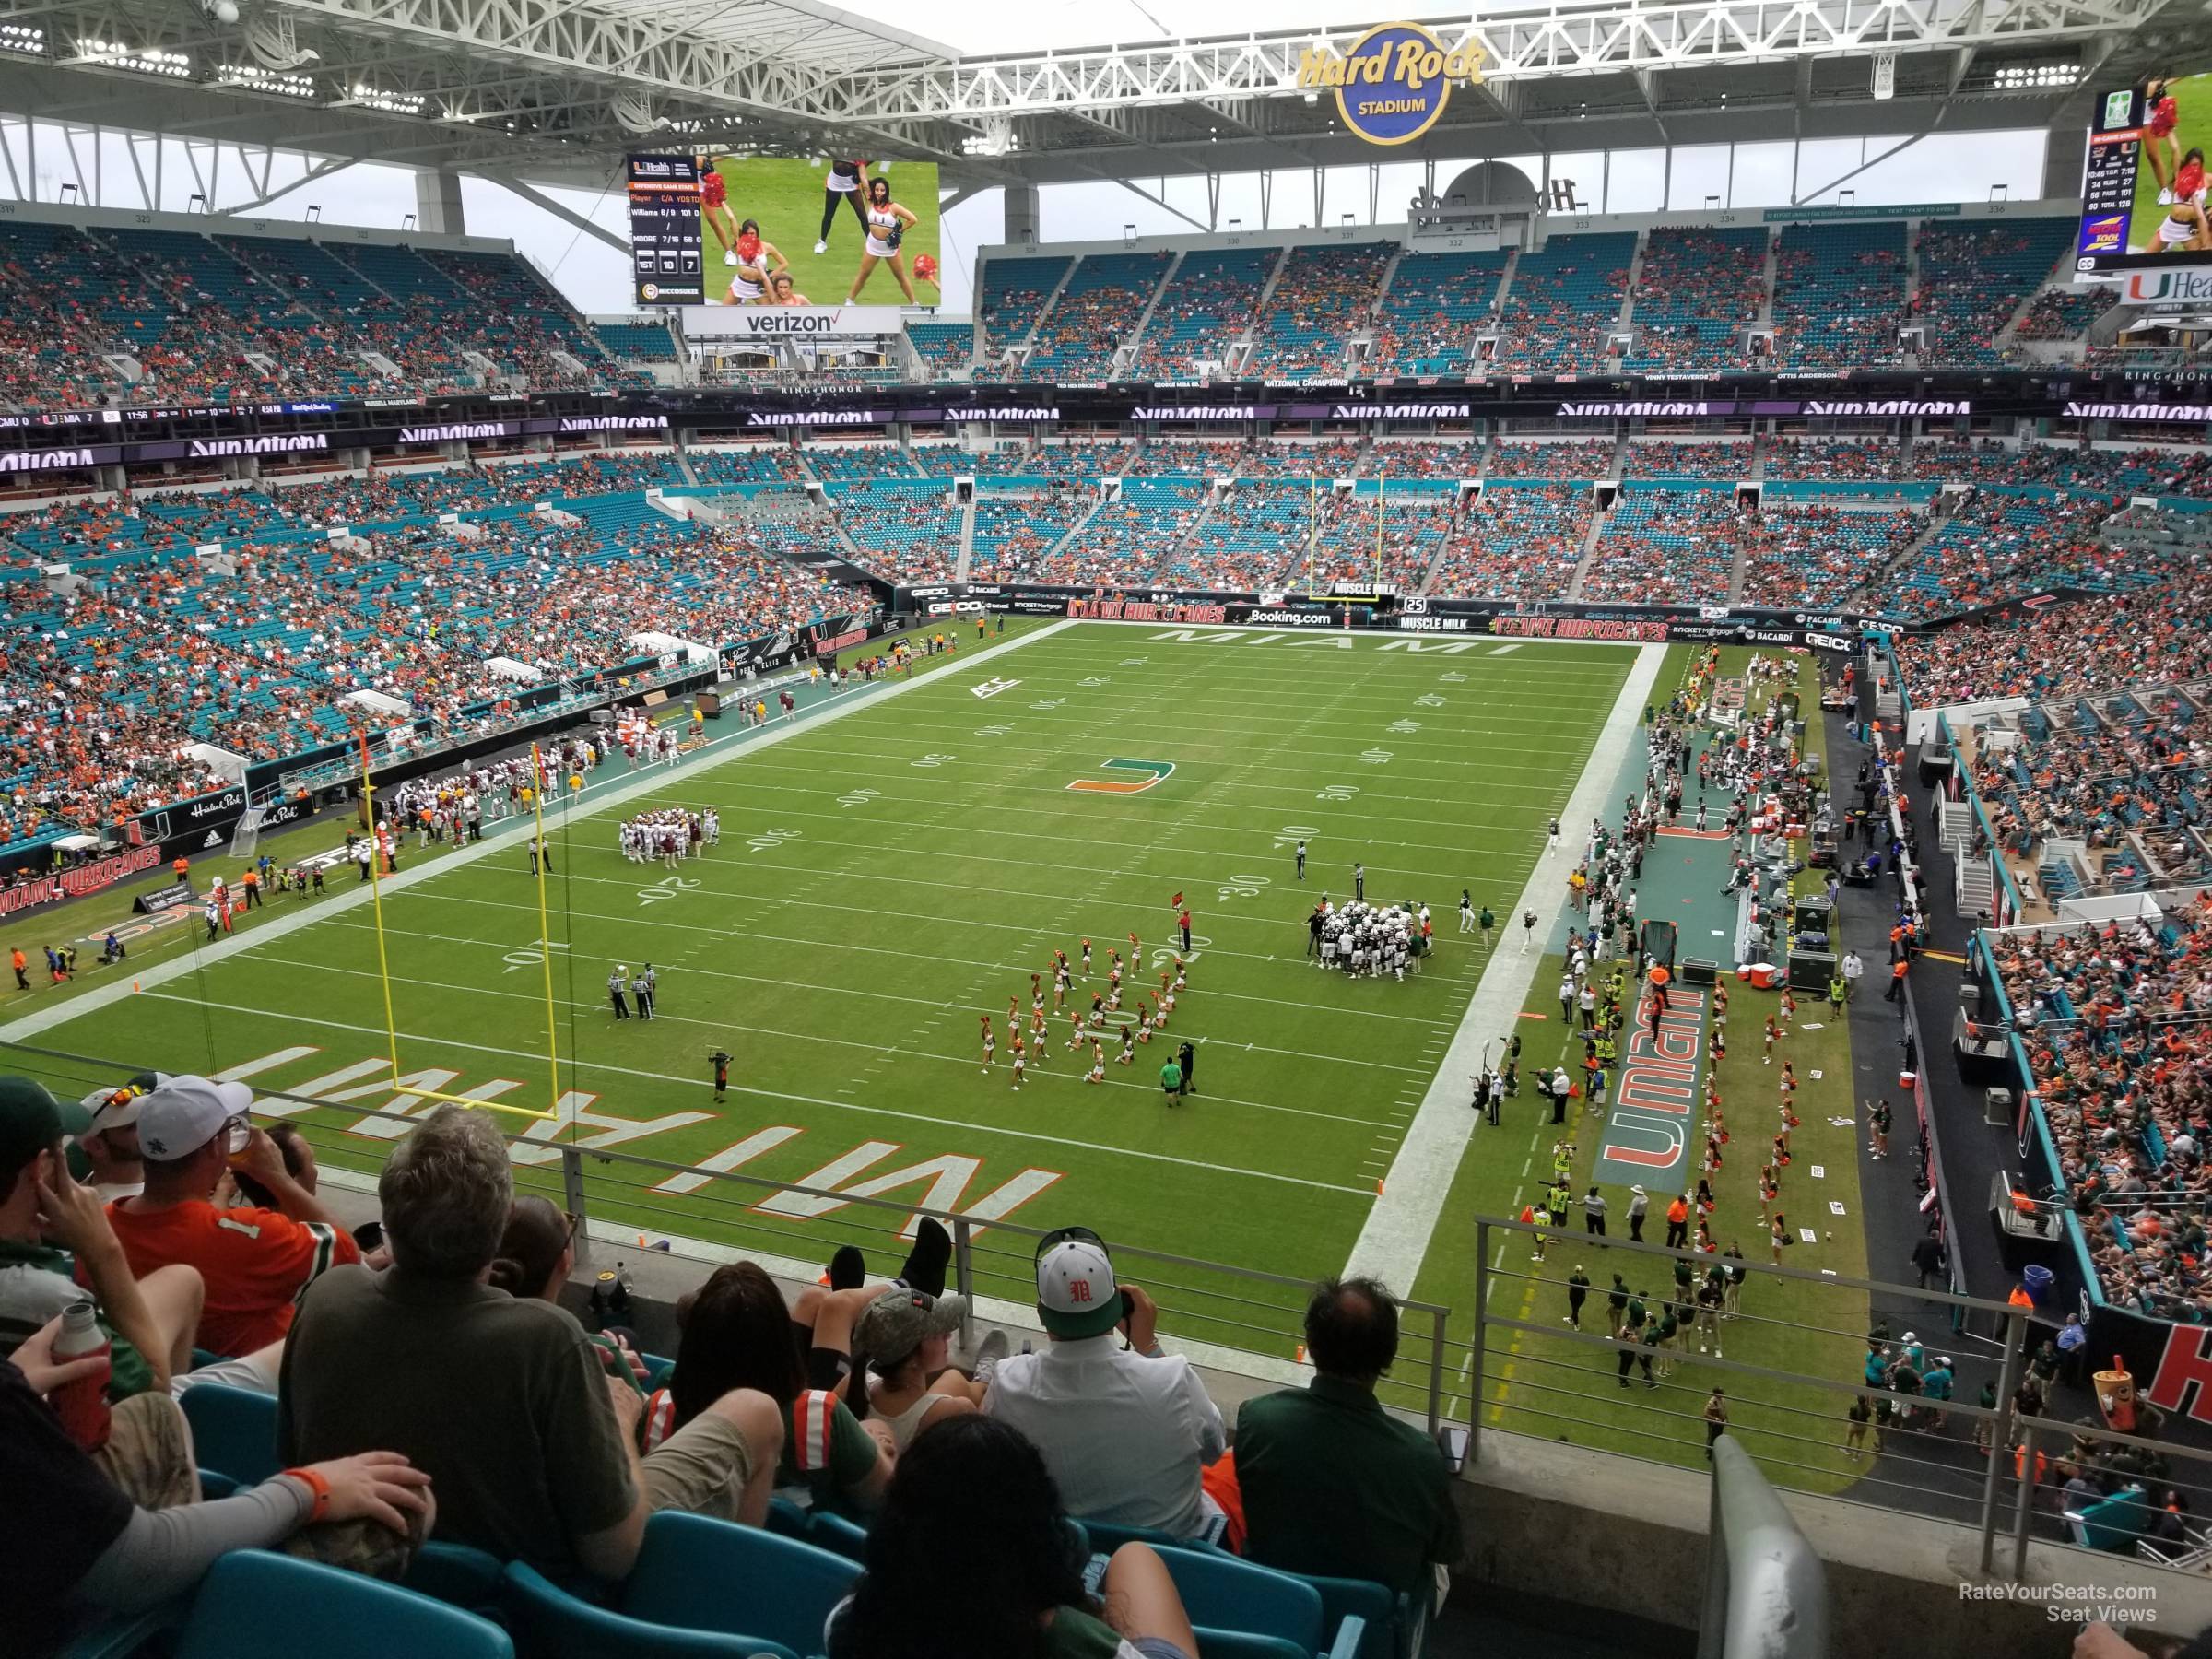 section 302, row 5 seat view  for football - hard rock stadium